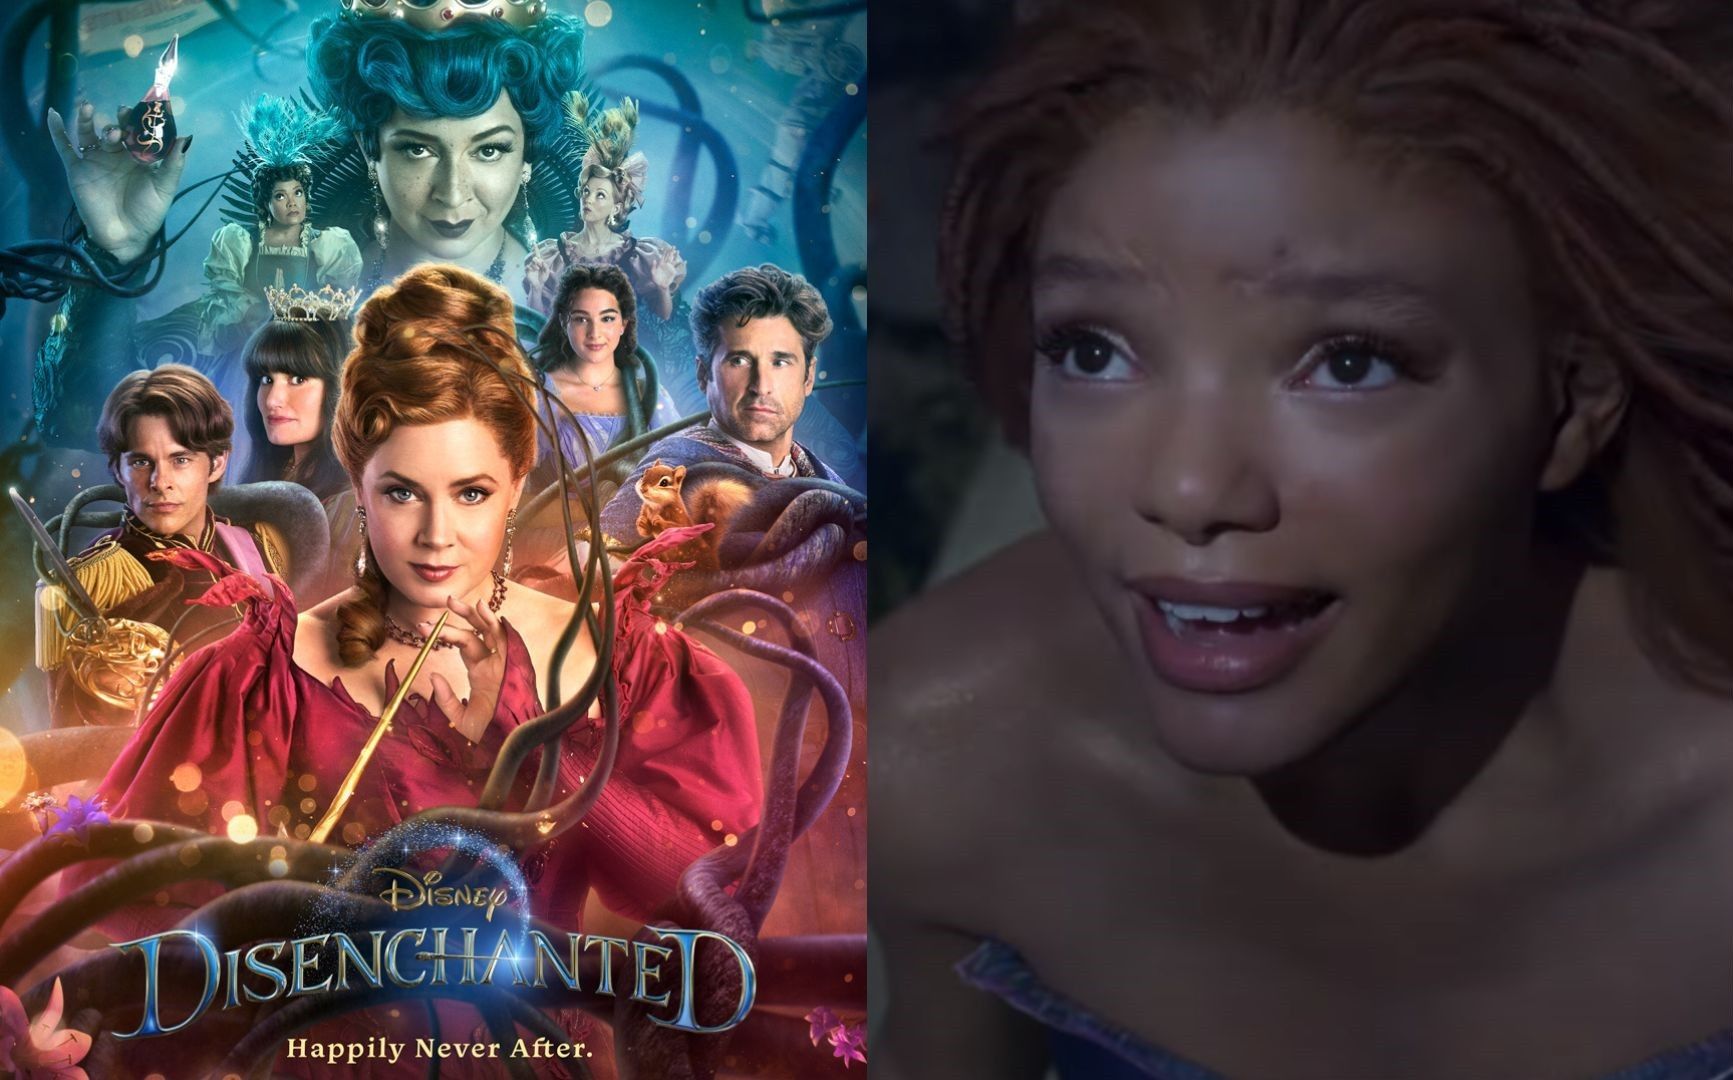 WATCH: Disney releases trailers for 'Enchanted' sequel, live-action 'The Little Mermaid'